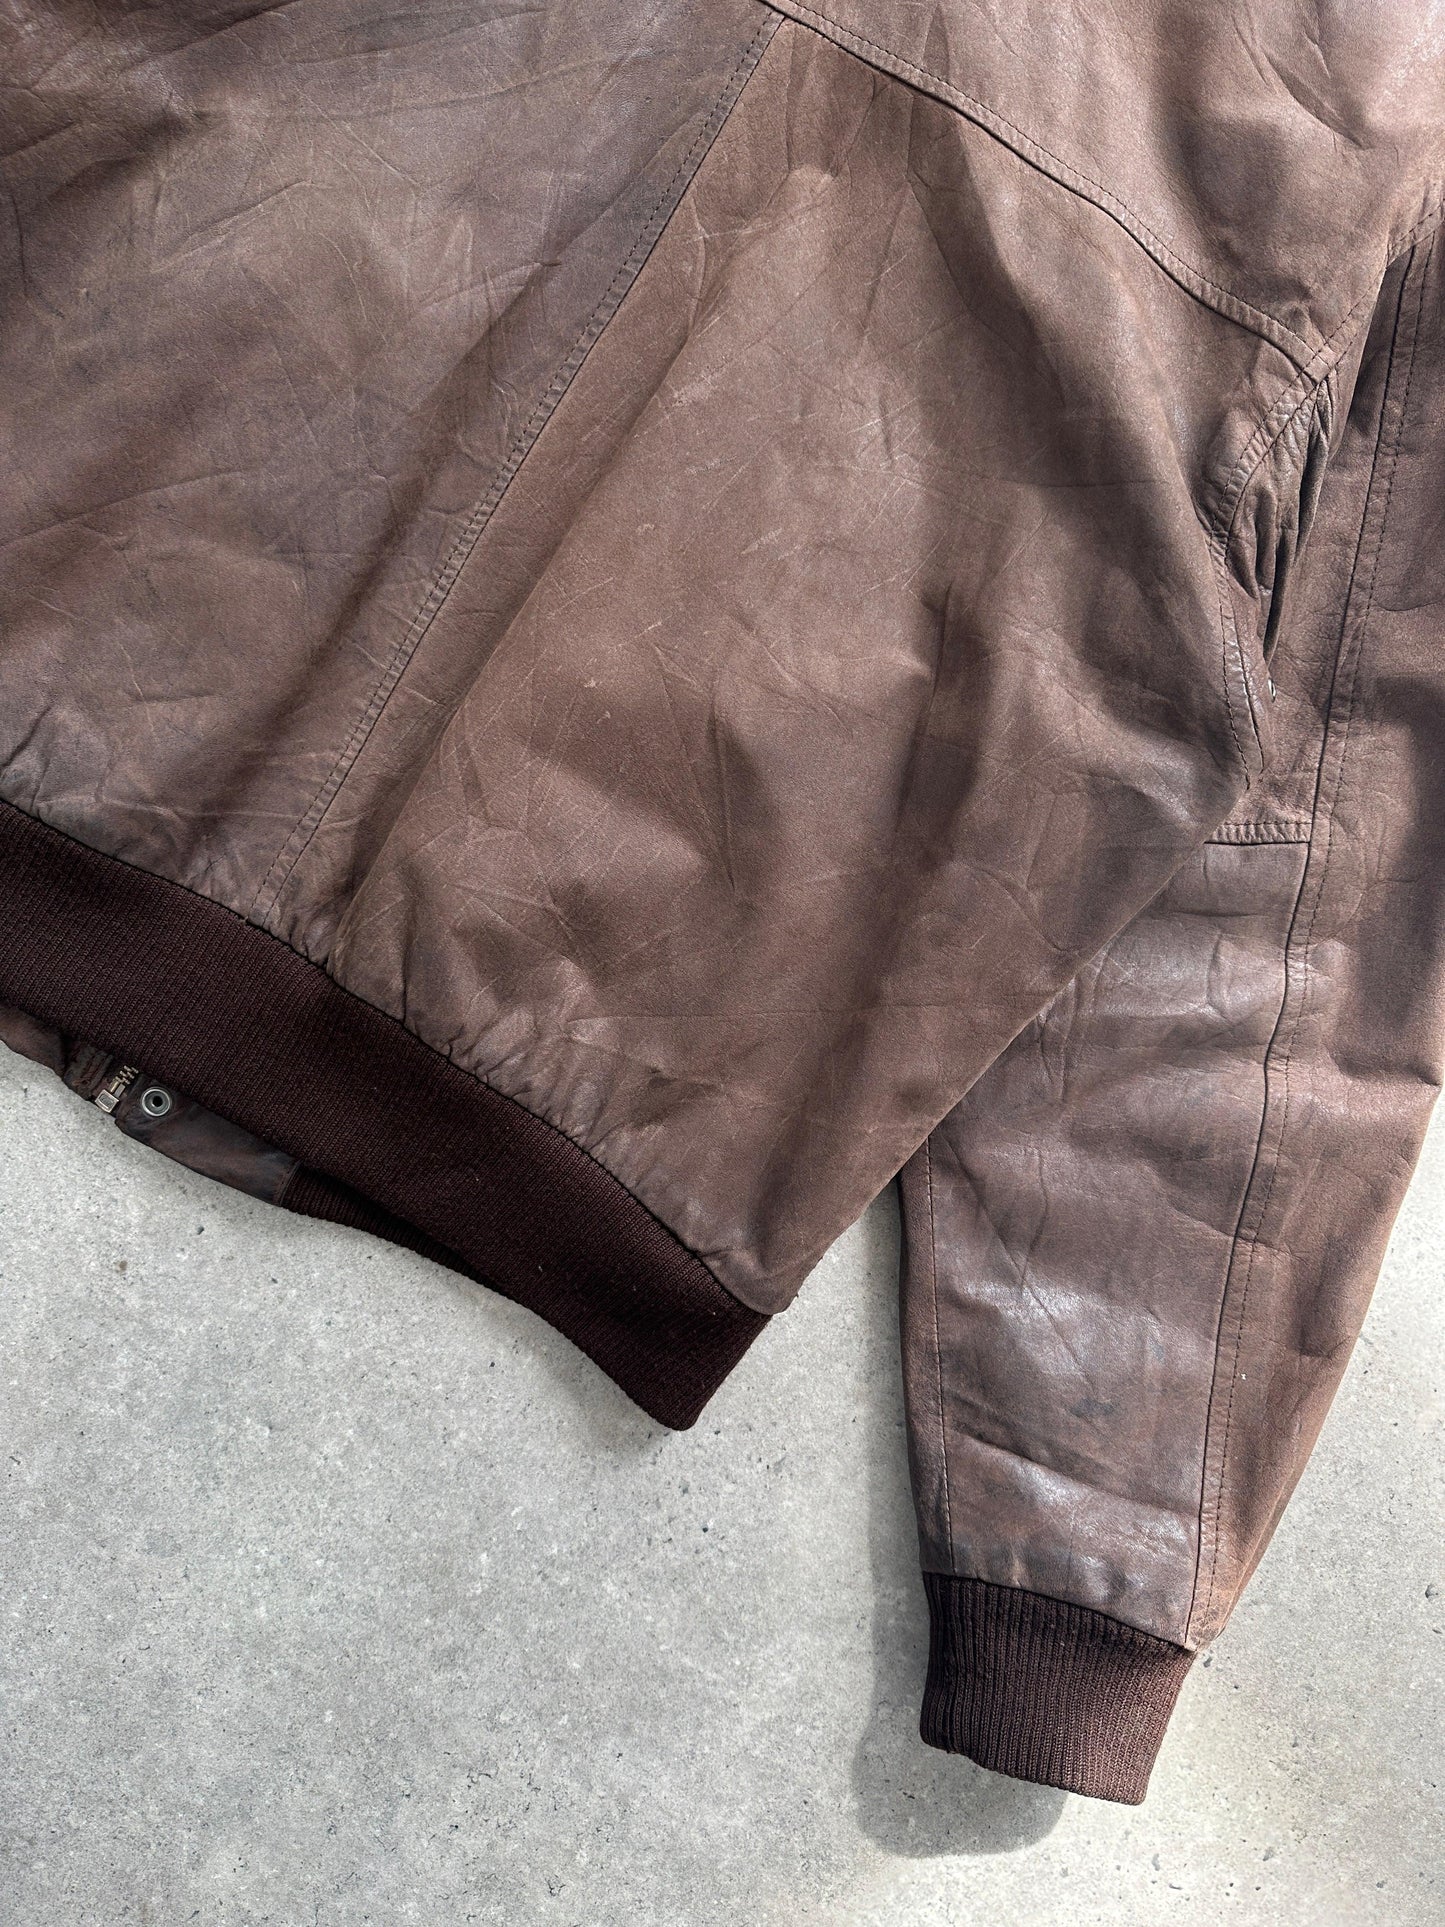 Vintage Distressed Leather Bomber Jacket - L - Known Source